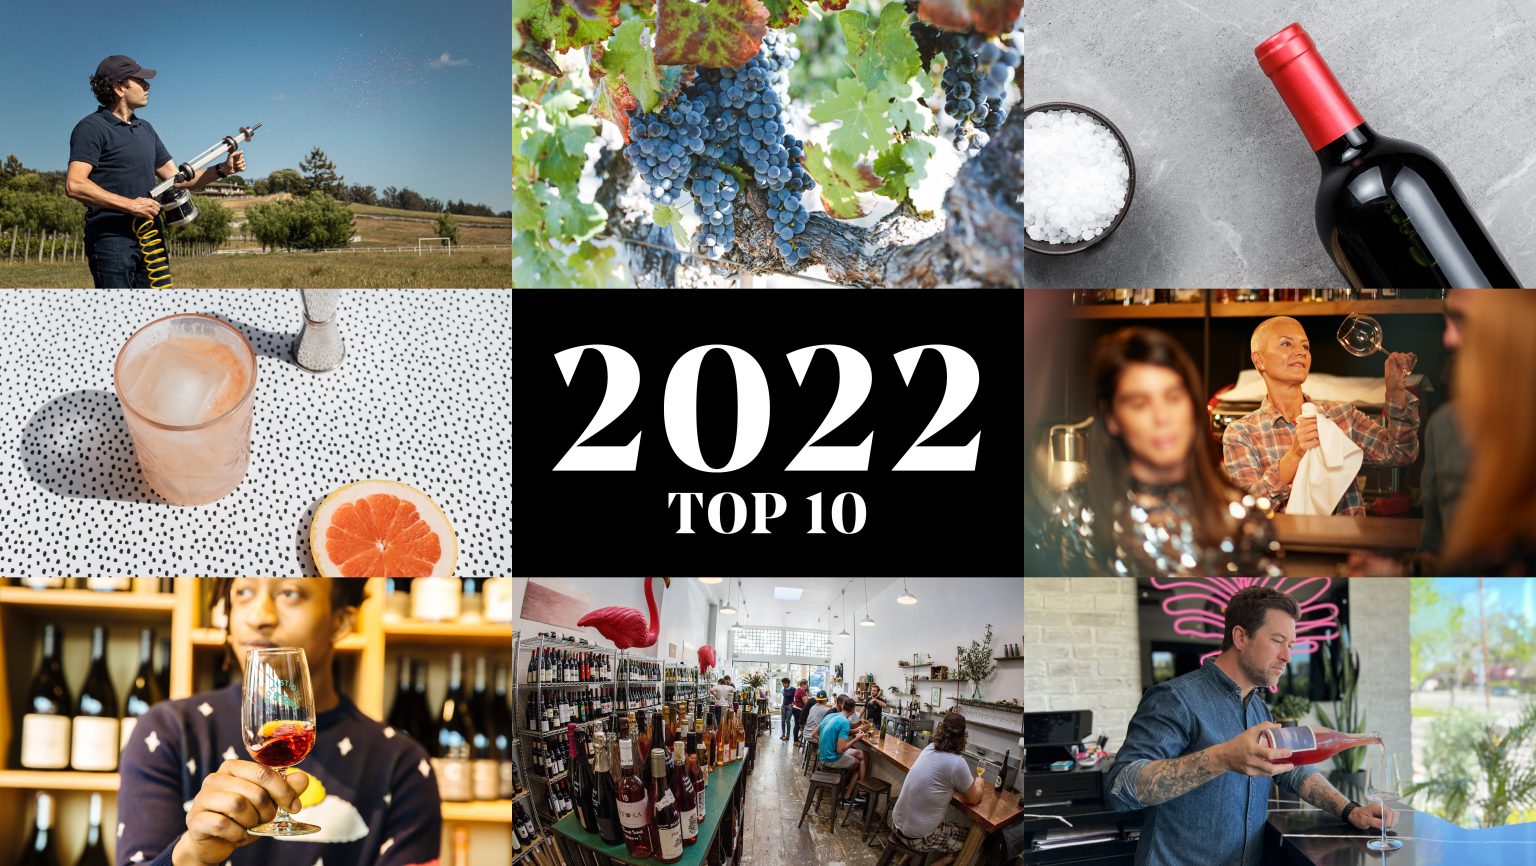 Our Most-Read Articles of 2022